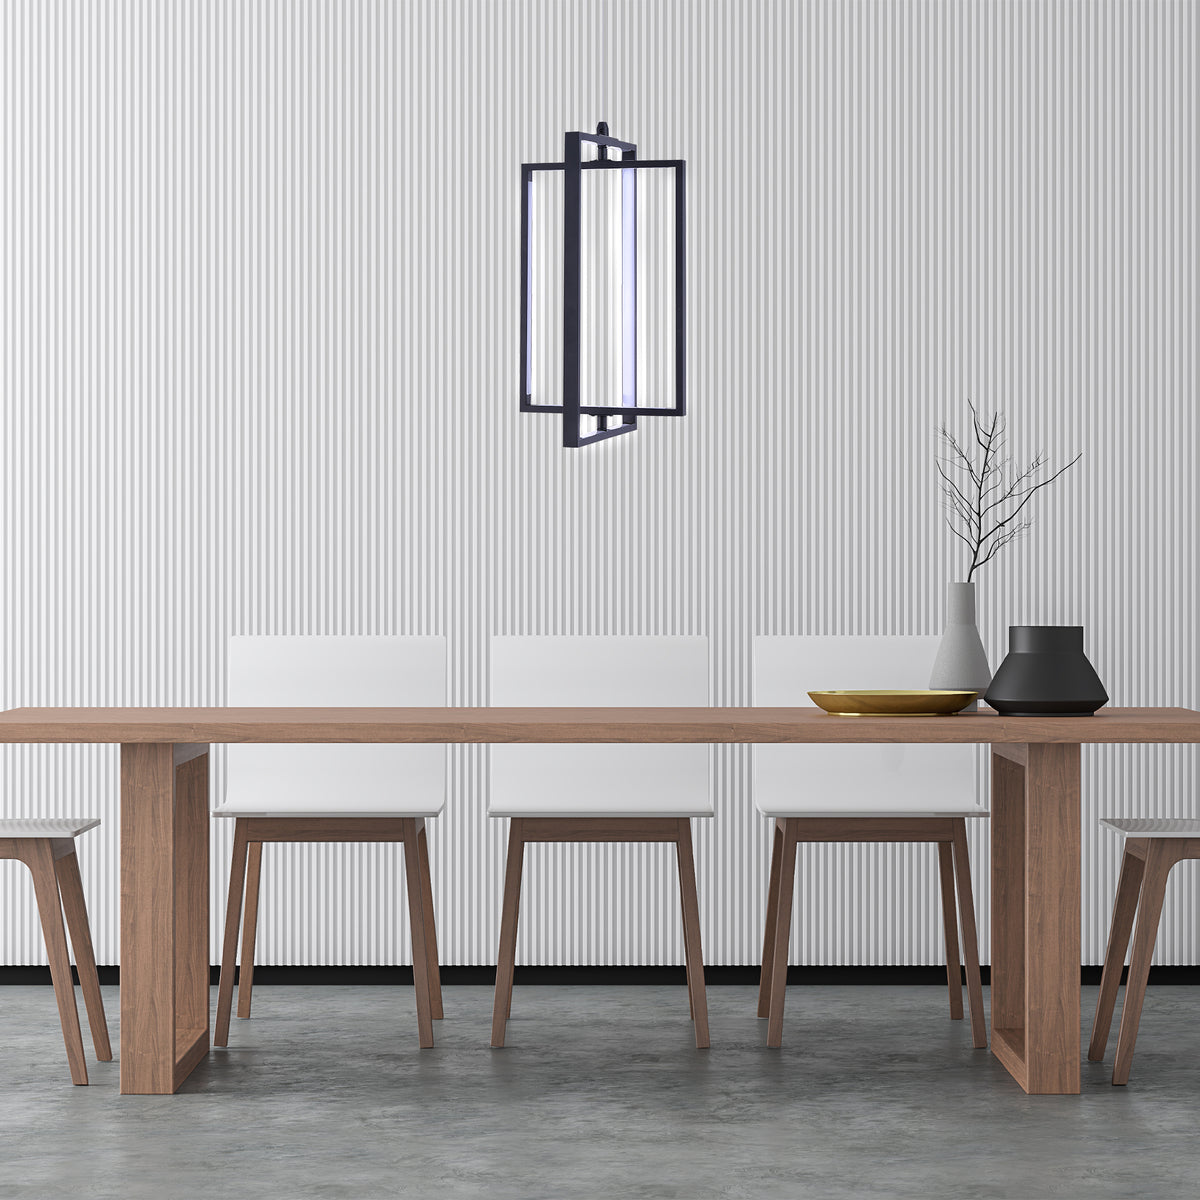 led pendant light over dining table